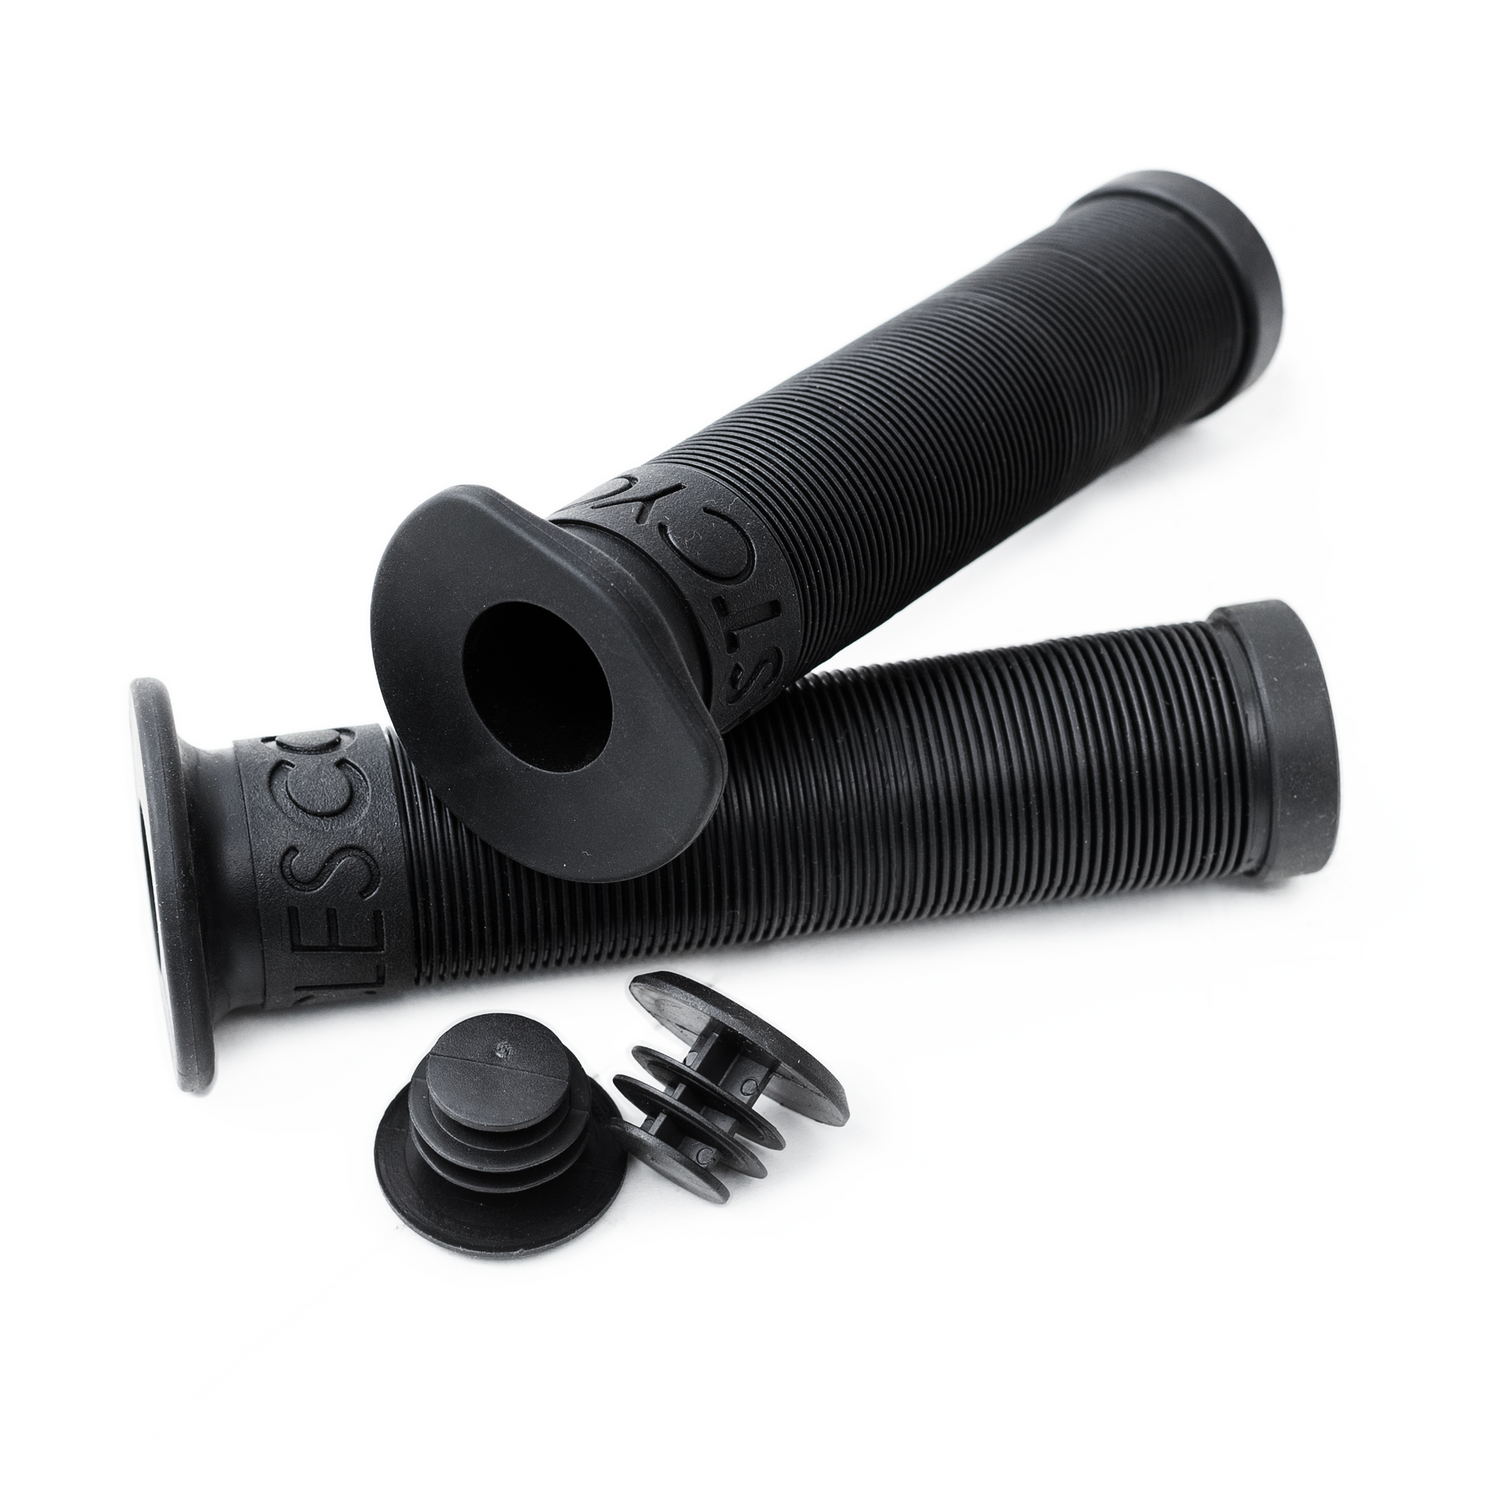 COAST COMPONENTS FLANGED GRIPS